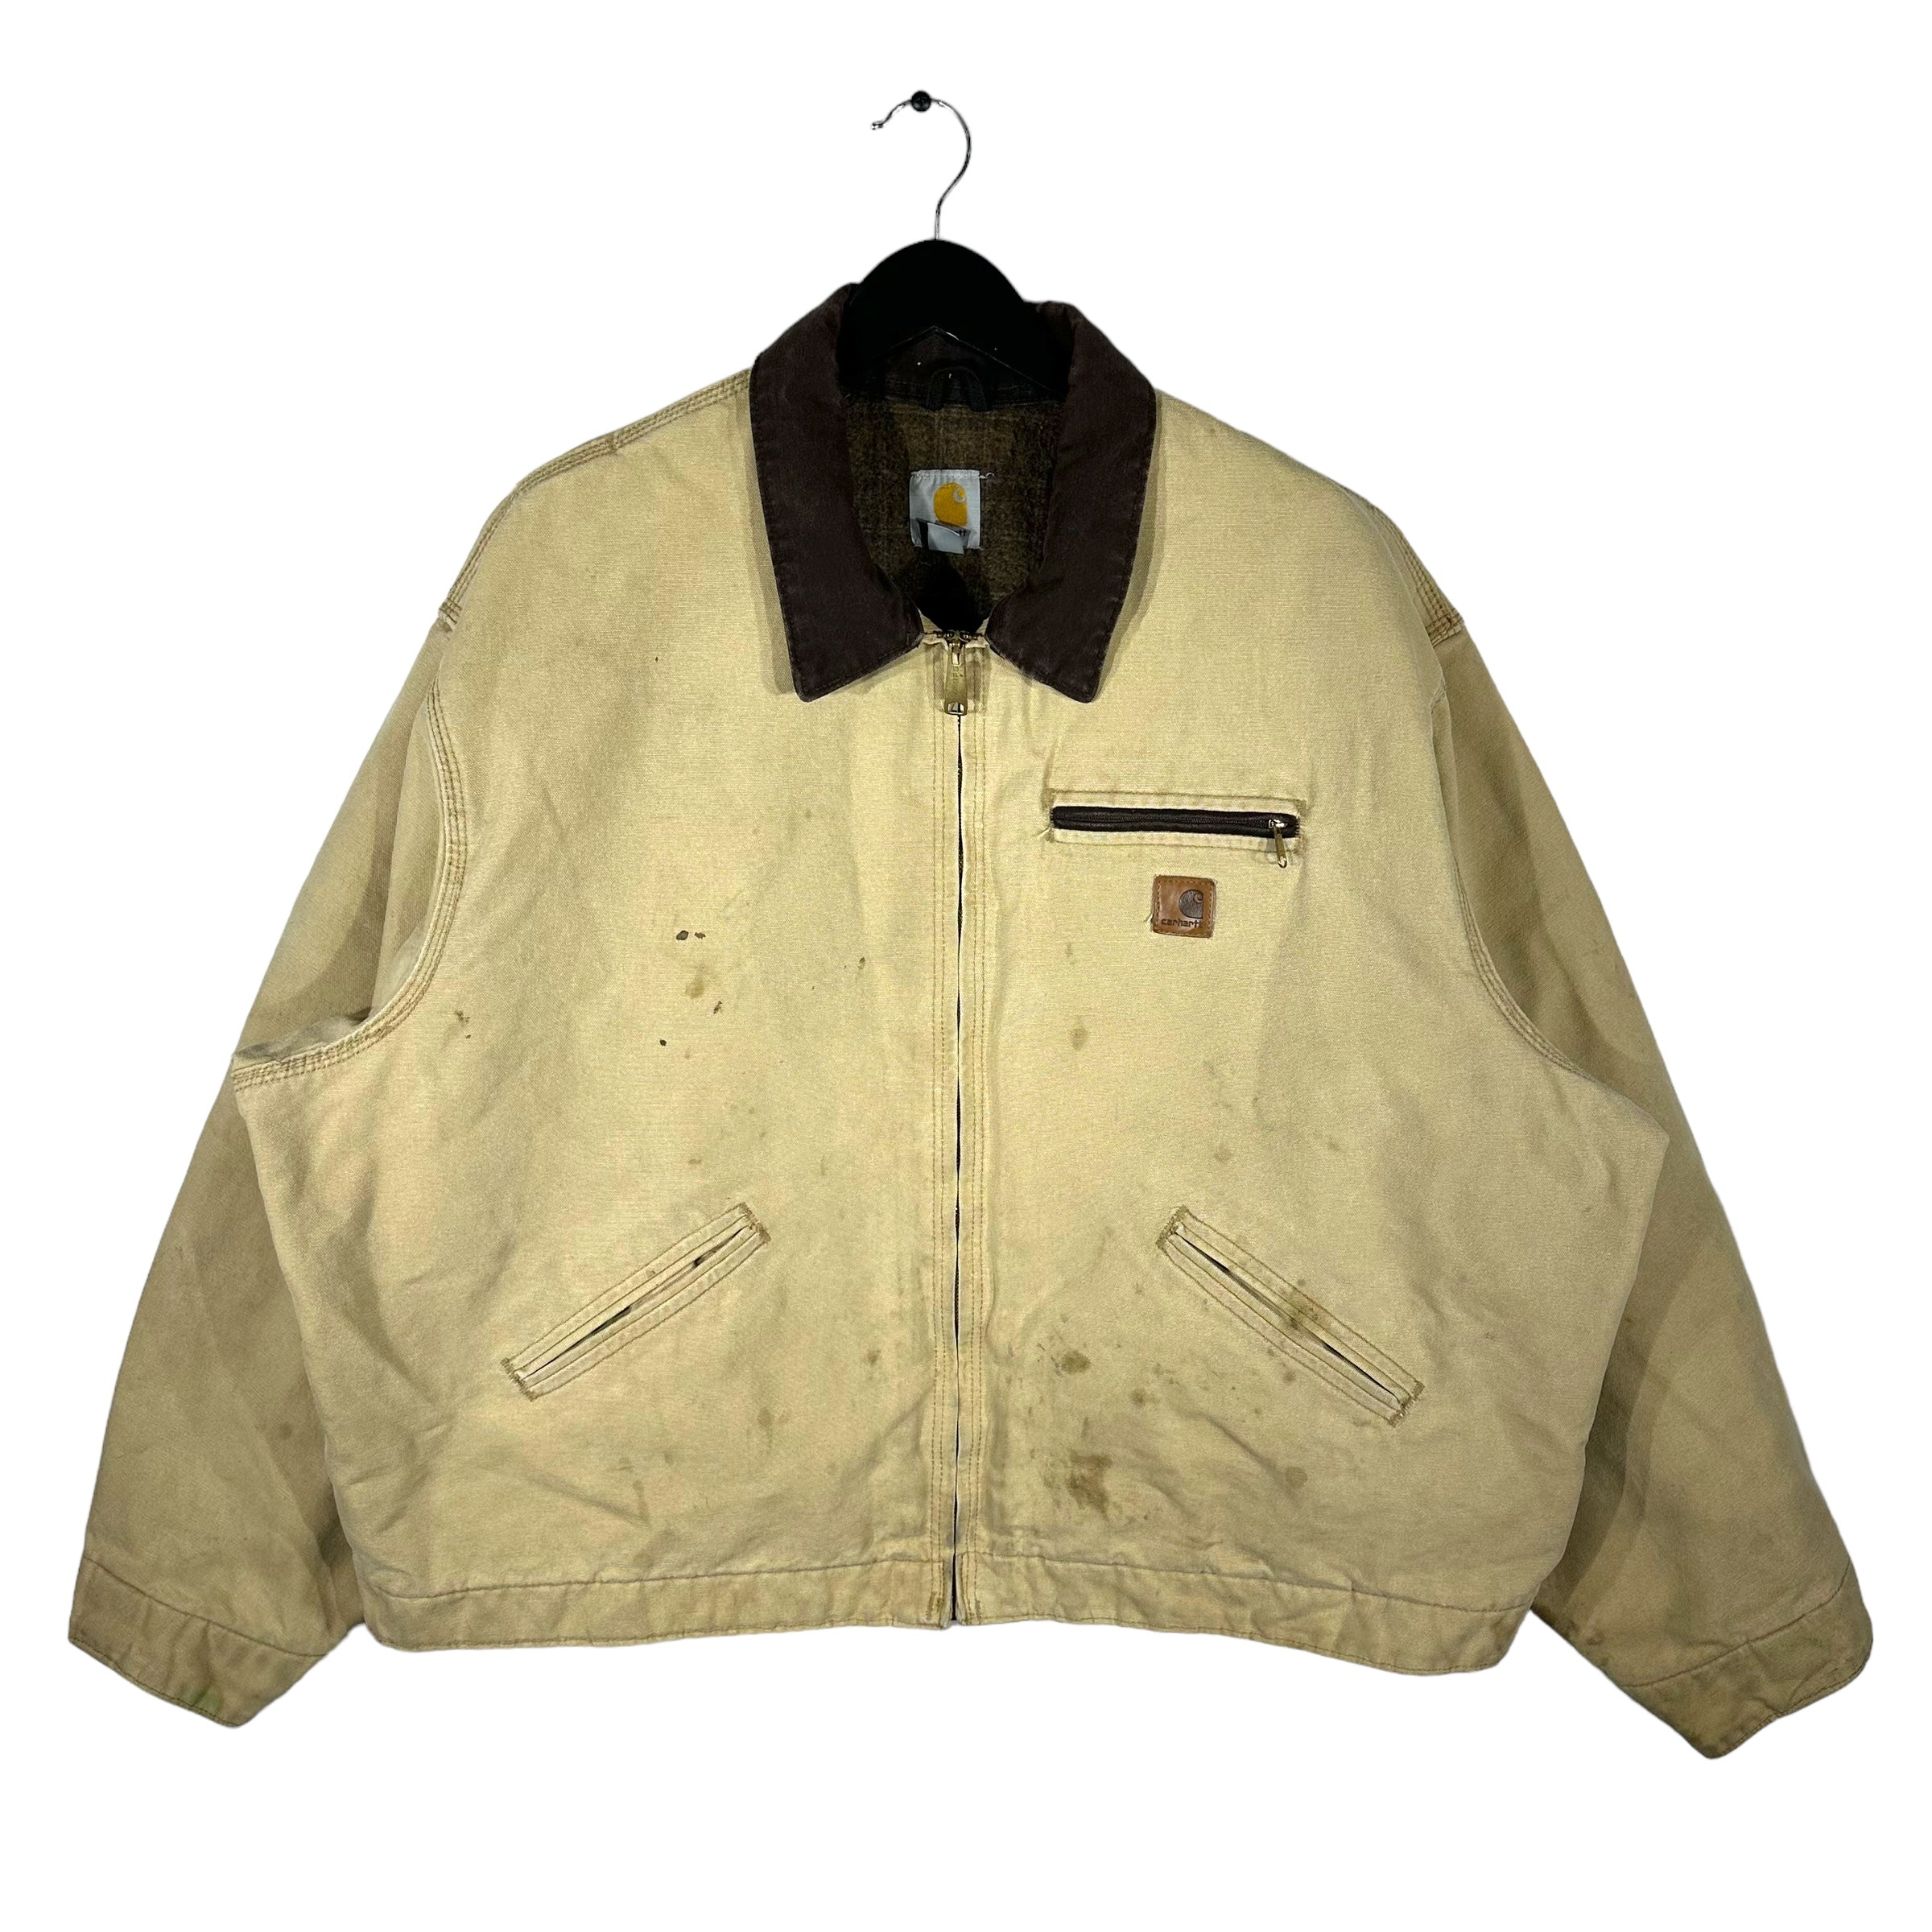 Vintage Carhartt Insulated Faded Detroit Jacket